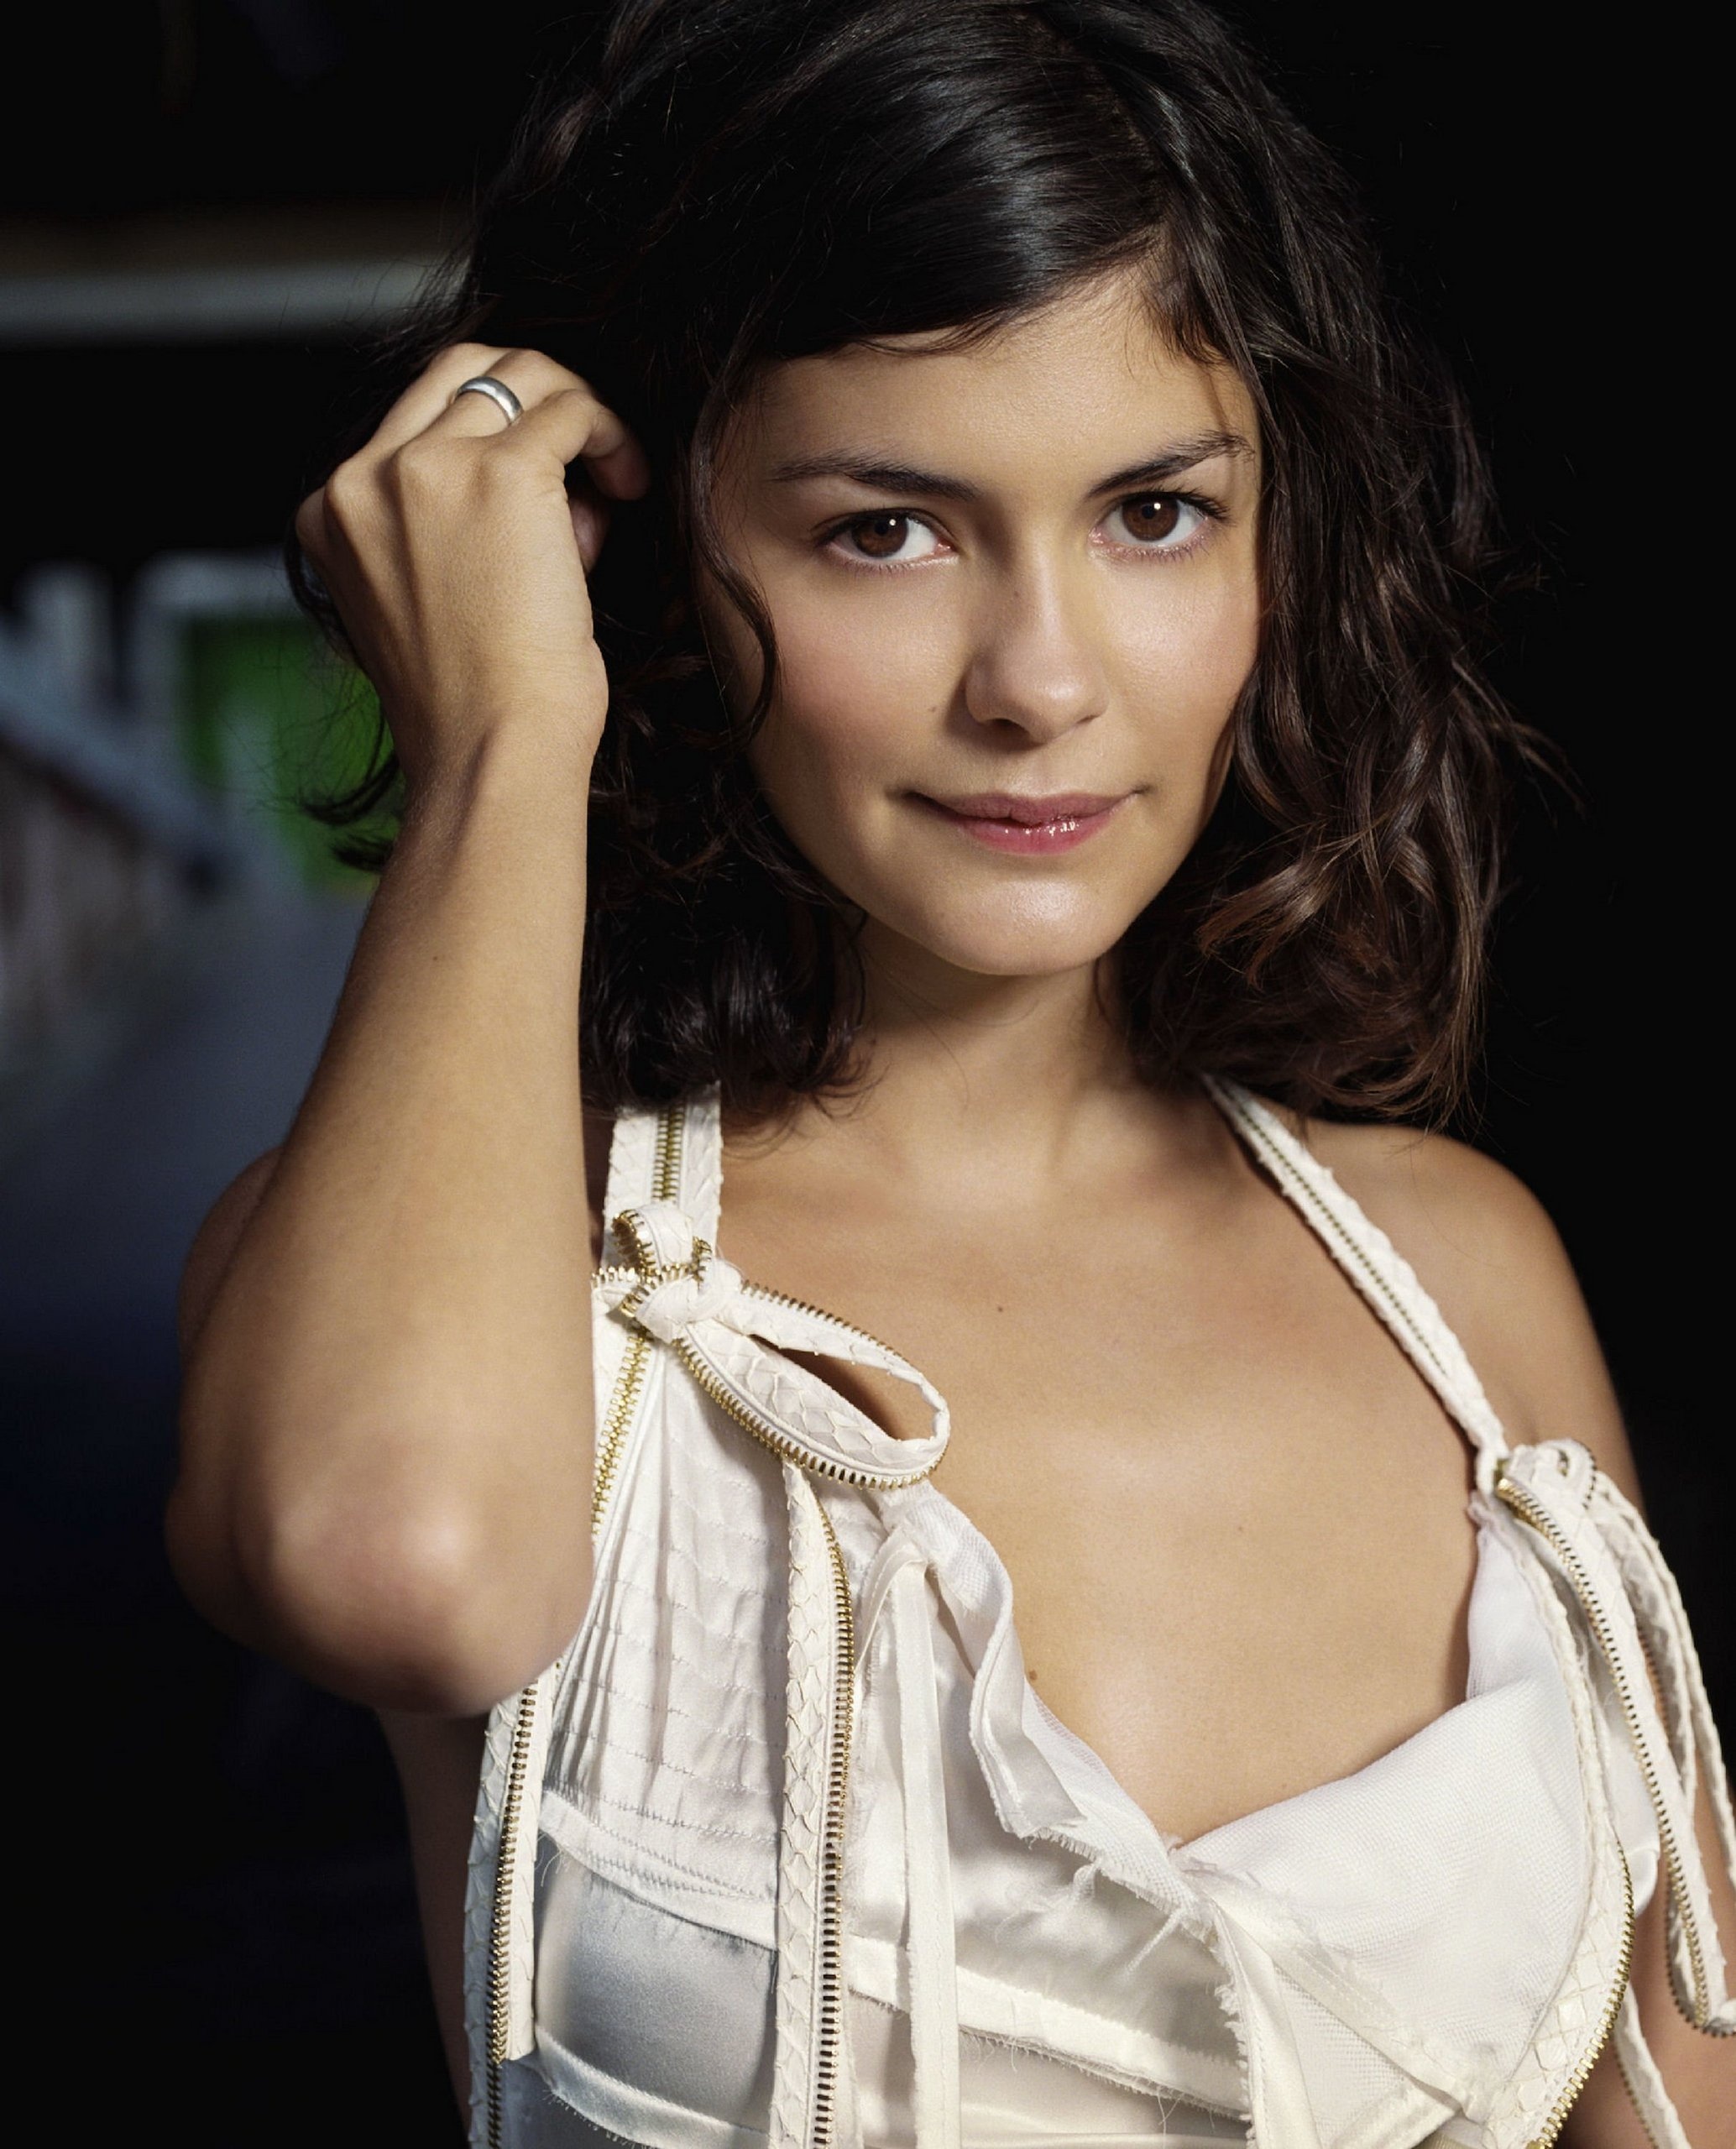 Audrey Tautou: Lead Role In Film Amelie, International Recognition Since 2001, Cesar Award and BAFTA Nominee. 2070x2560 HD Background.